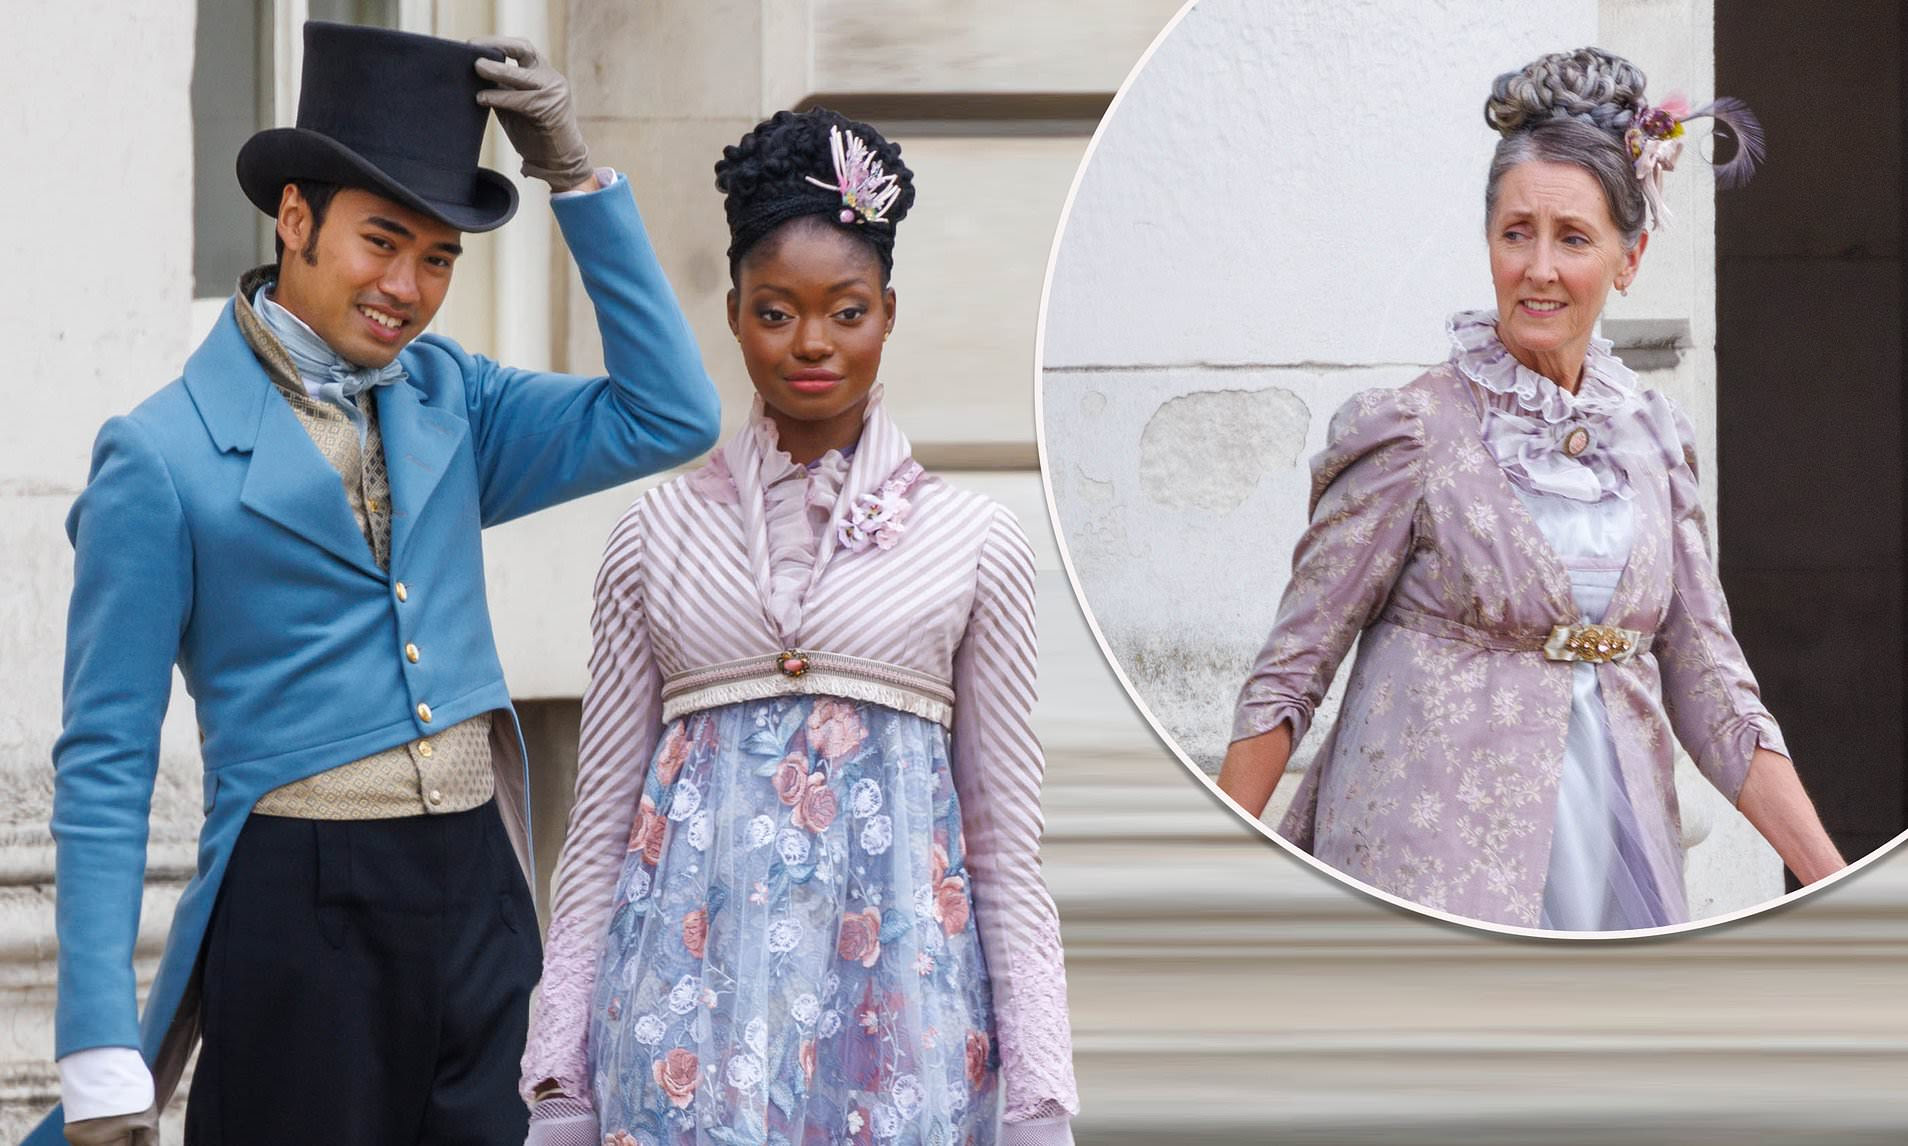 Bridgerton continues filming for series three in Greenwich as cast turn heads in period costumes